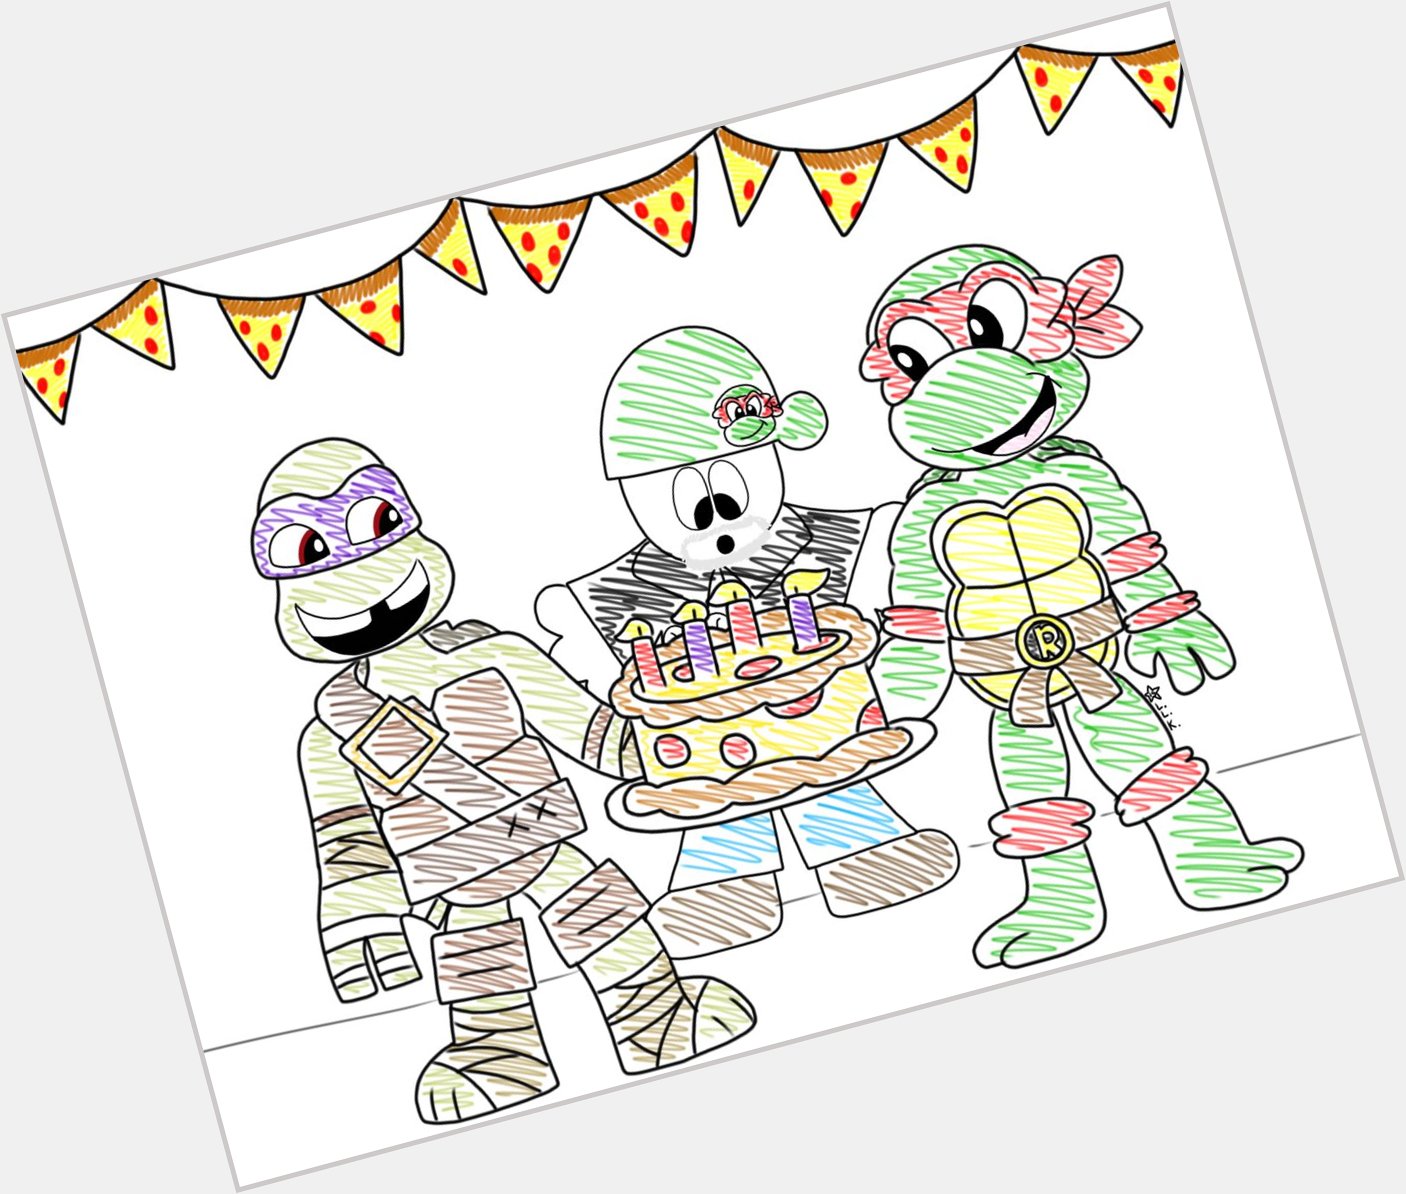 Happy Birthday Mr. Rob Paulsen!! Donnie and Raphael threw this bodacious birthday party to celebrate you!  